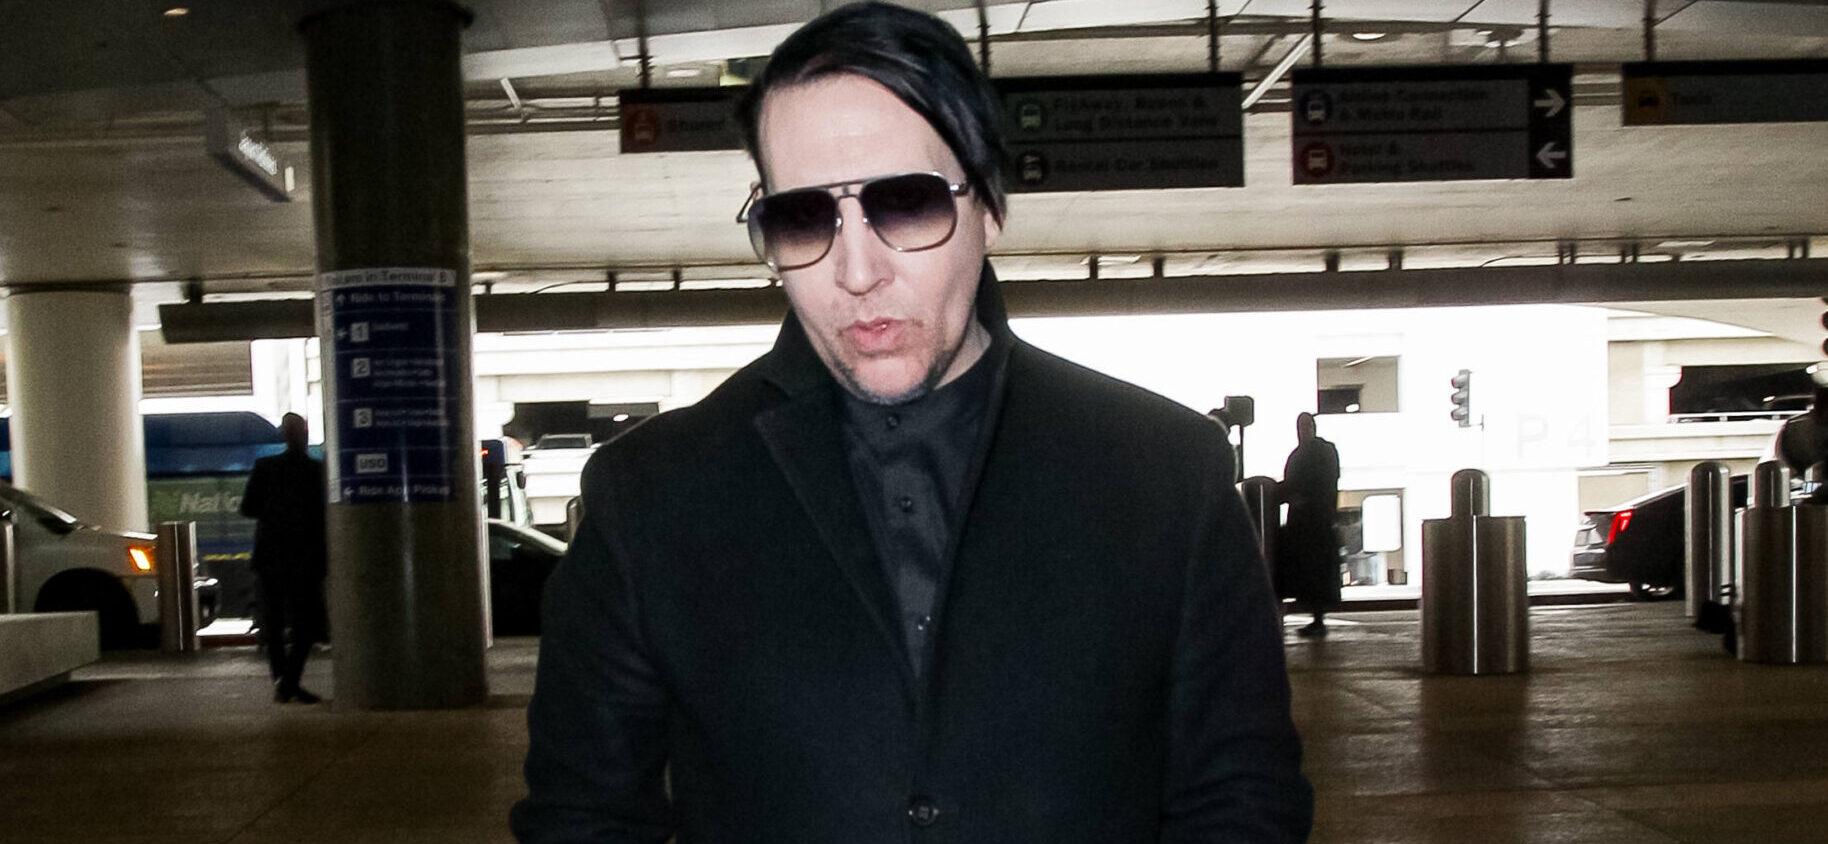 Marilyn Manson Settles Lawsuit With Woman Accusing Him Of Rape